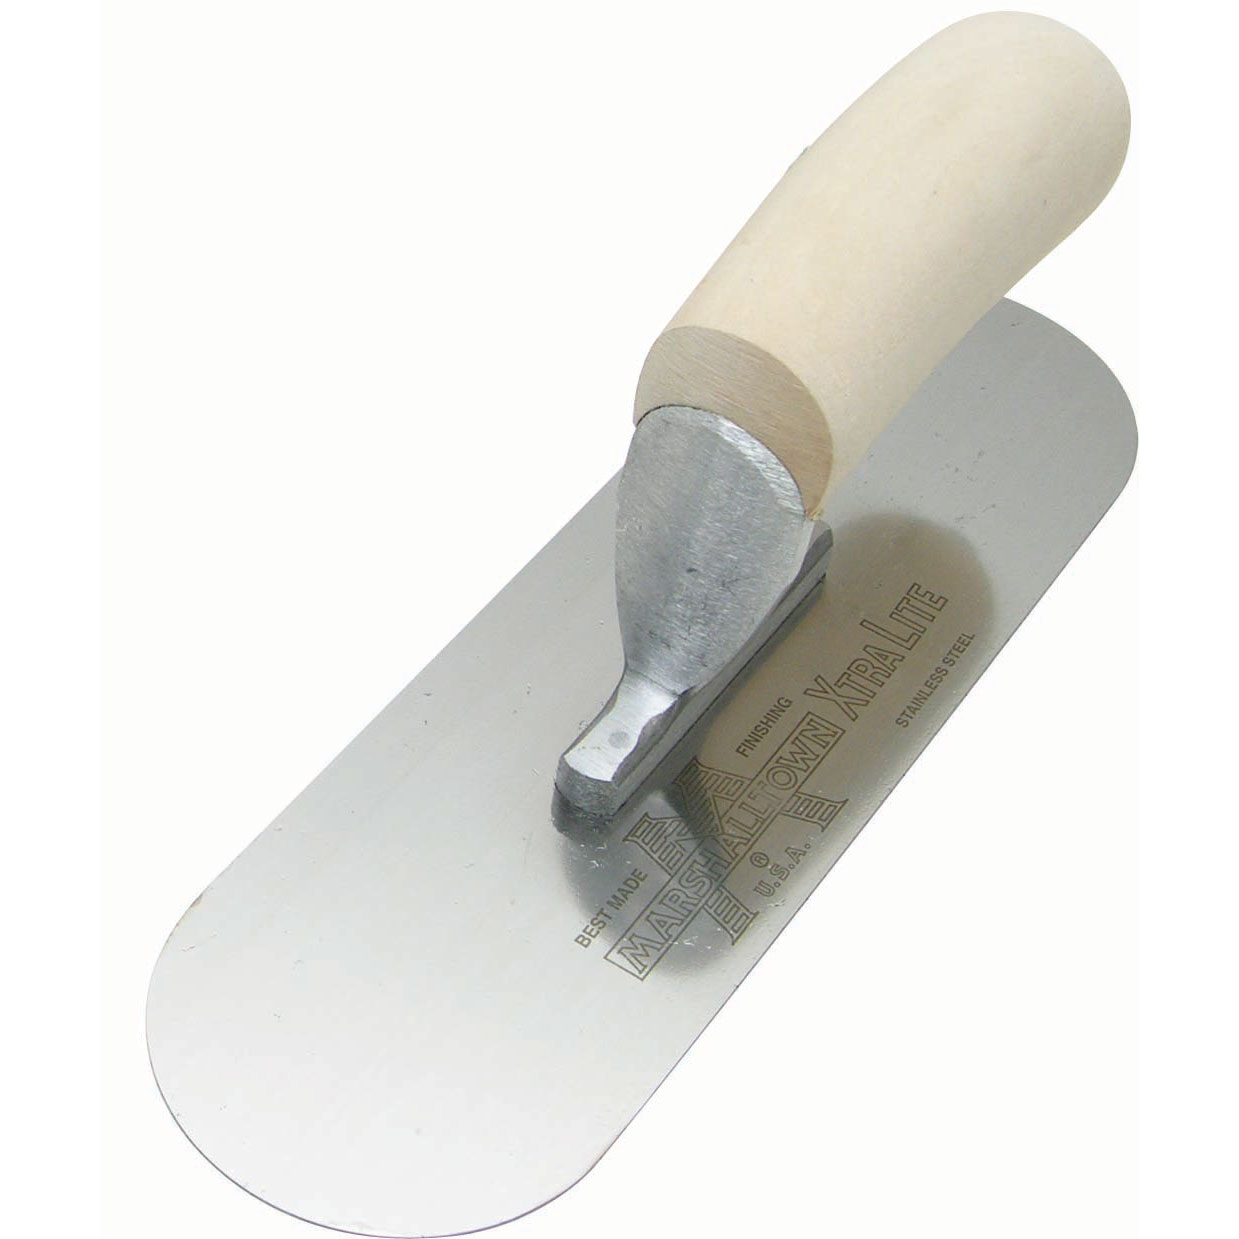 Marshalltown SP12SSR3 12in x 3-1/2in Pool Trowel with Exposed Rivet Trowels and Wood Handle SP12SSR3